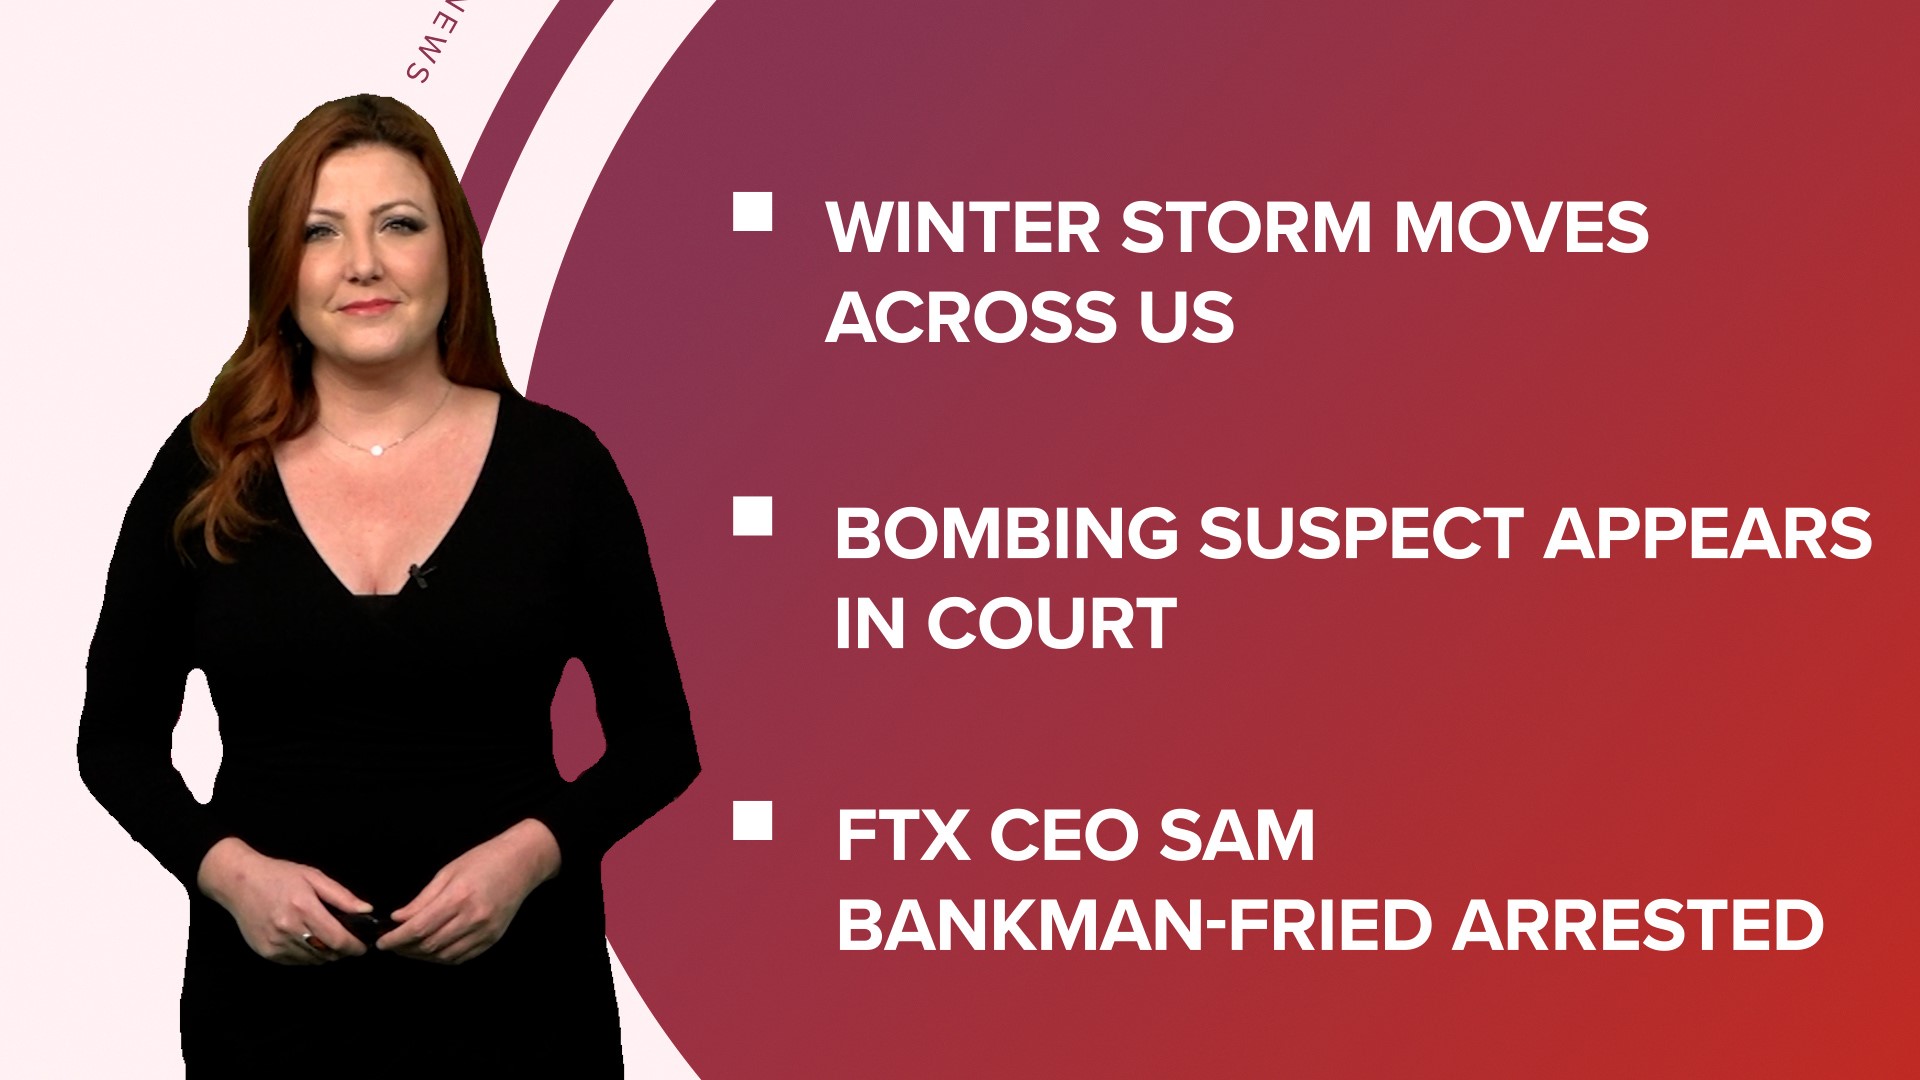 A look at what is happening in the news from the massive winter storm moving across the country to FTX CEO arrested and bombing suspect in court.